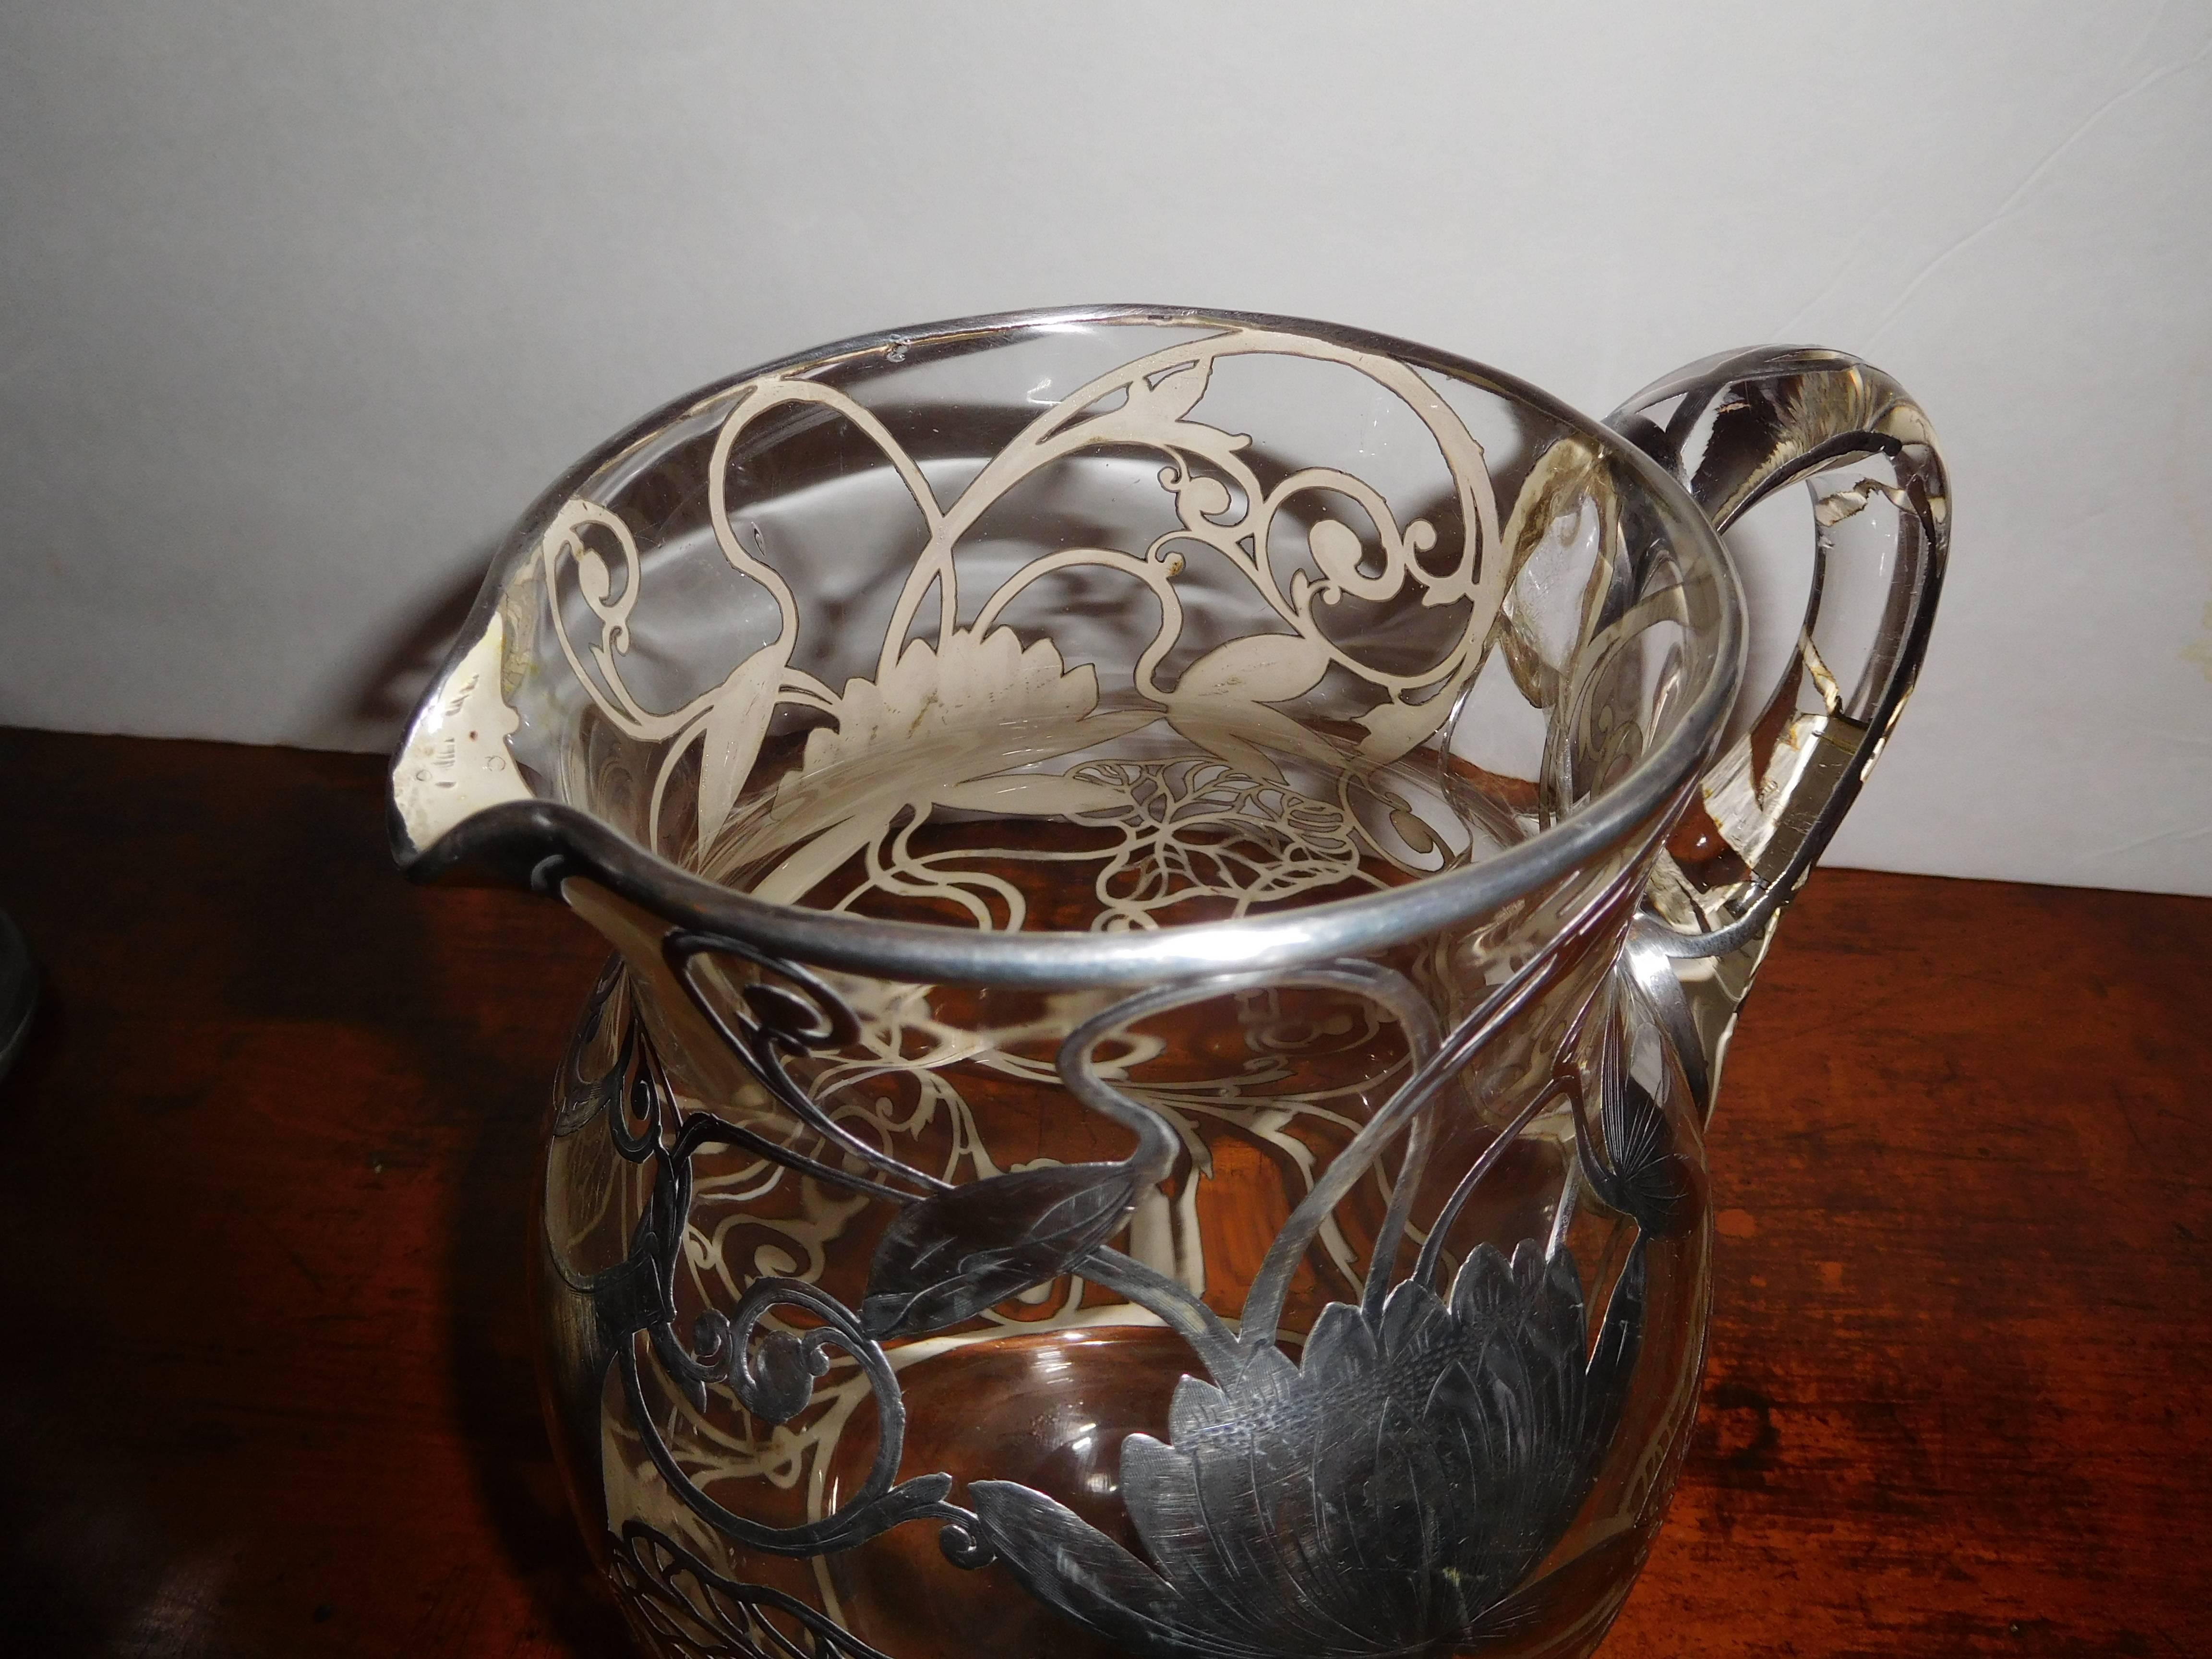 Pressed French Art Nouveau Sterling Silver Overlay Vase or Pitcher